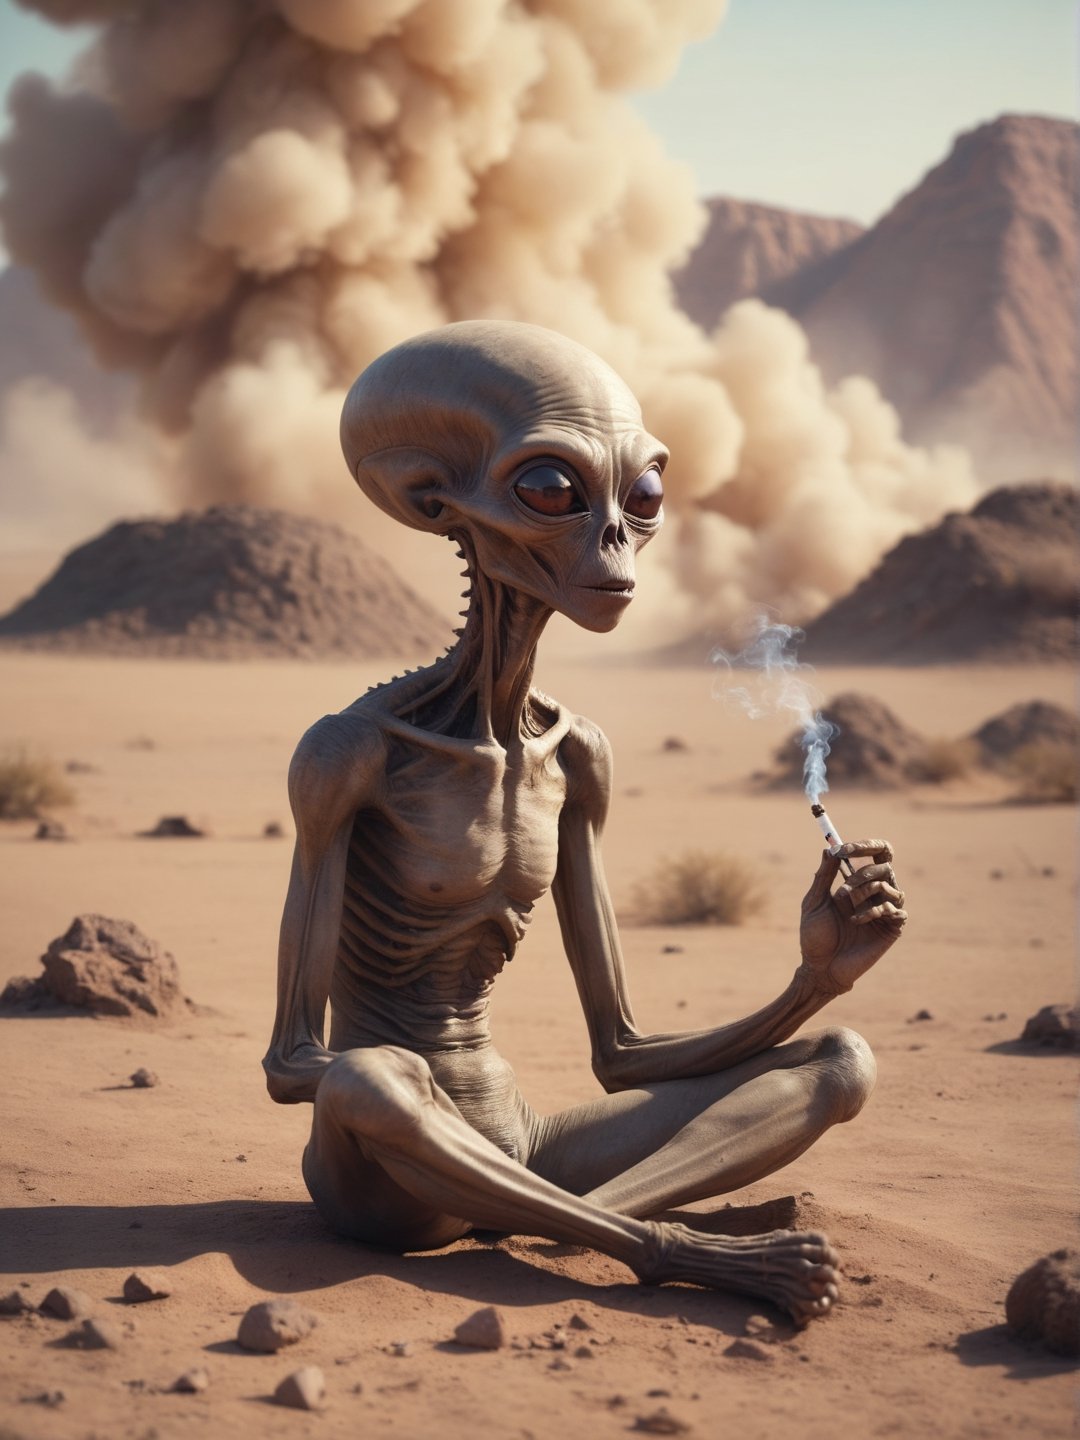 Sad alien smokes, sitting on a ground, An alien ship crashed into the ground, (fire:0.5), desert,
(Smoke:0.9),
,cinematic_warm_color, add_more_creative,alien